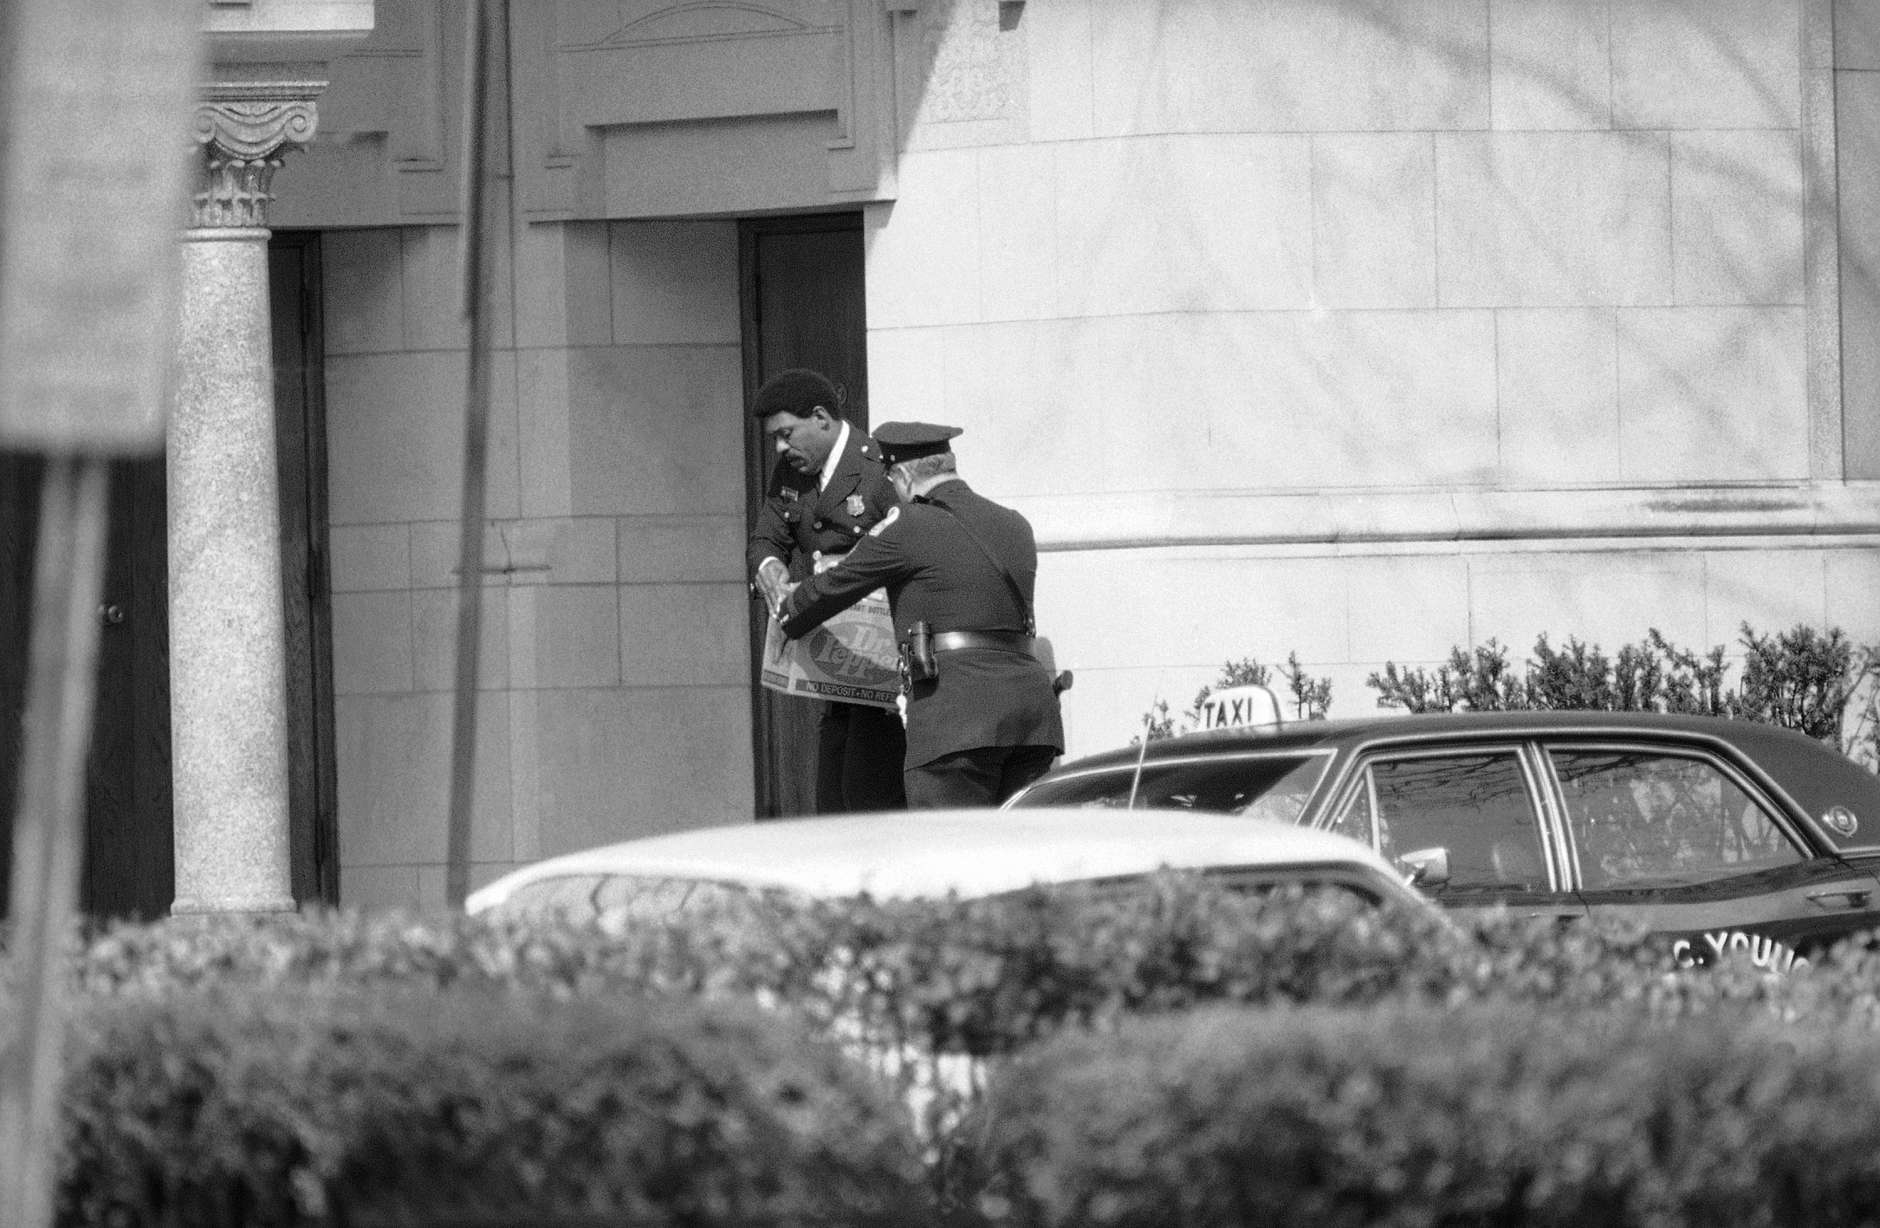 Police officers deliver a box of food to a door at the Islamic Center in Washington on March 10, 1977 where gunmen are holding 14 hostages on Thursday. The center is one of three buildings where terrorists are holding captives. (AP Photo)